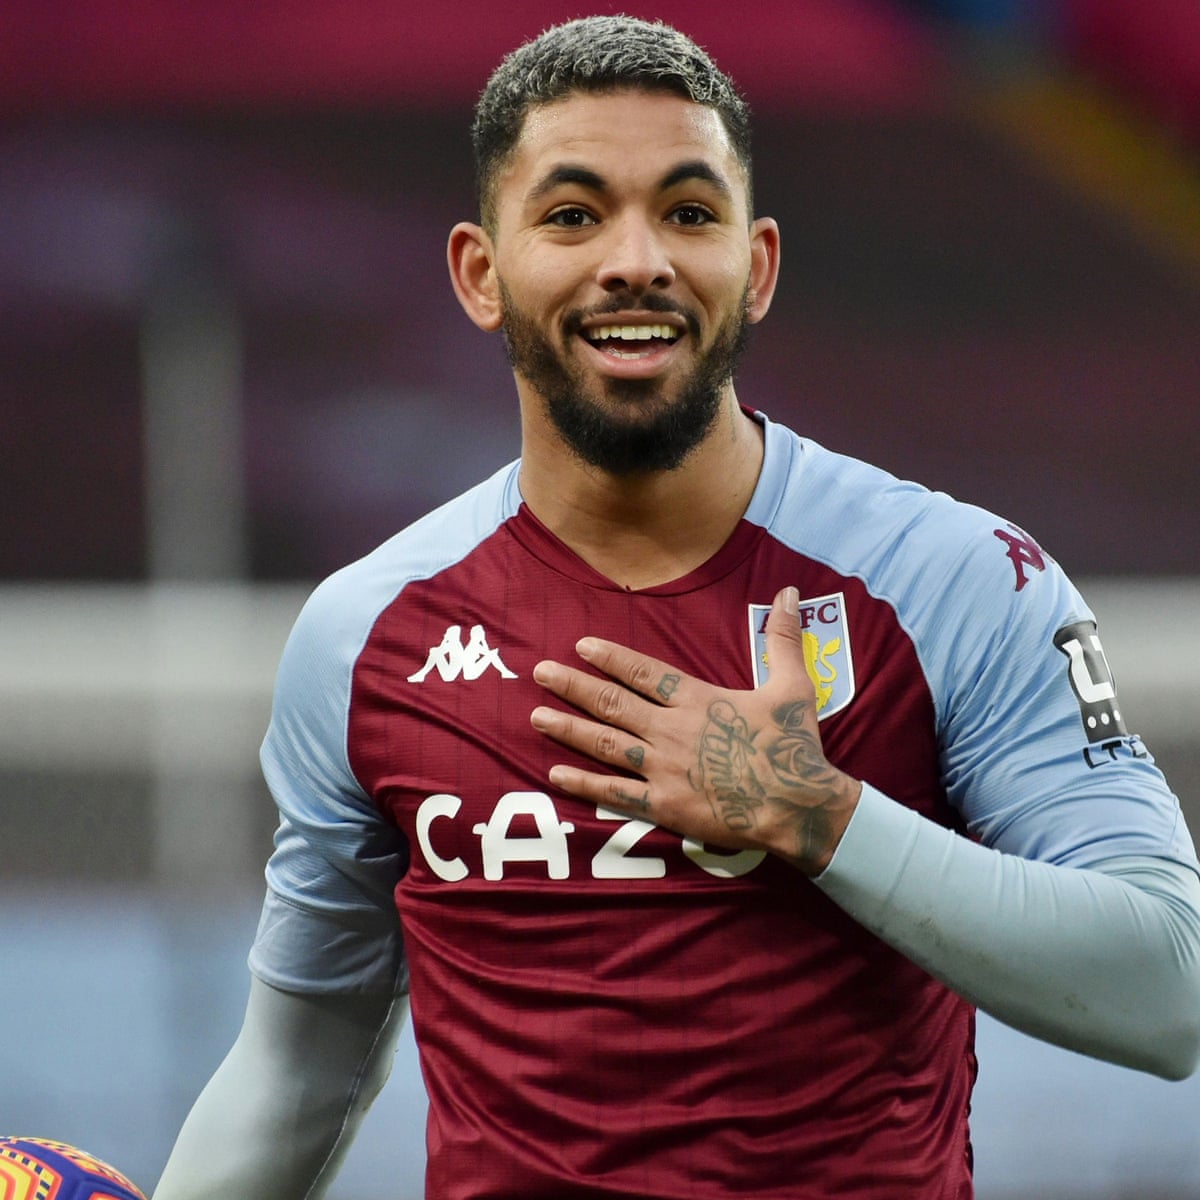 Douglas Luiz: 'I'm proud to be from the favela. I've proved we can make it' | Aston Villa | The Guardian